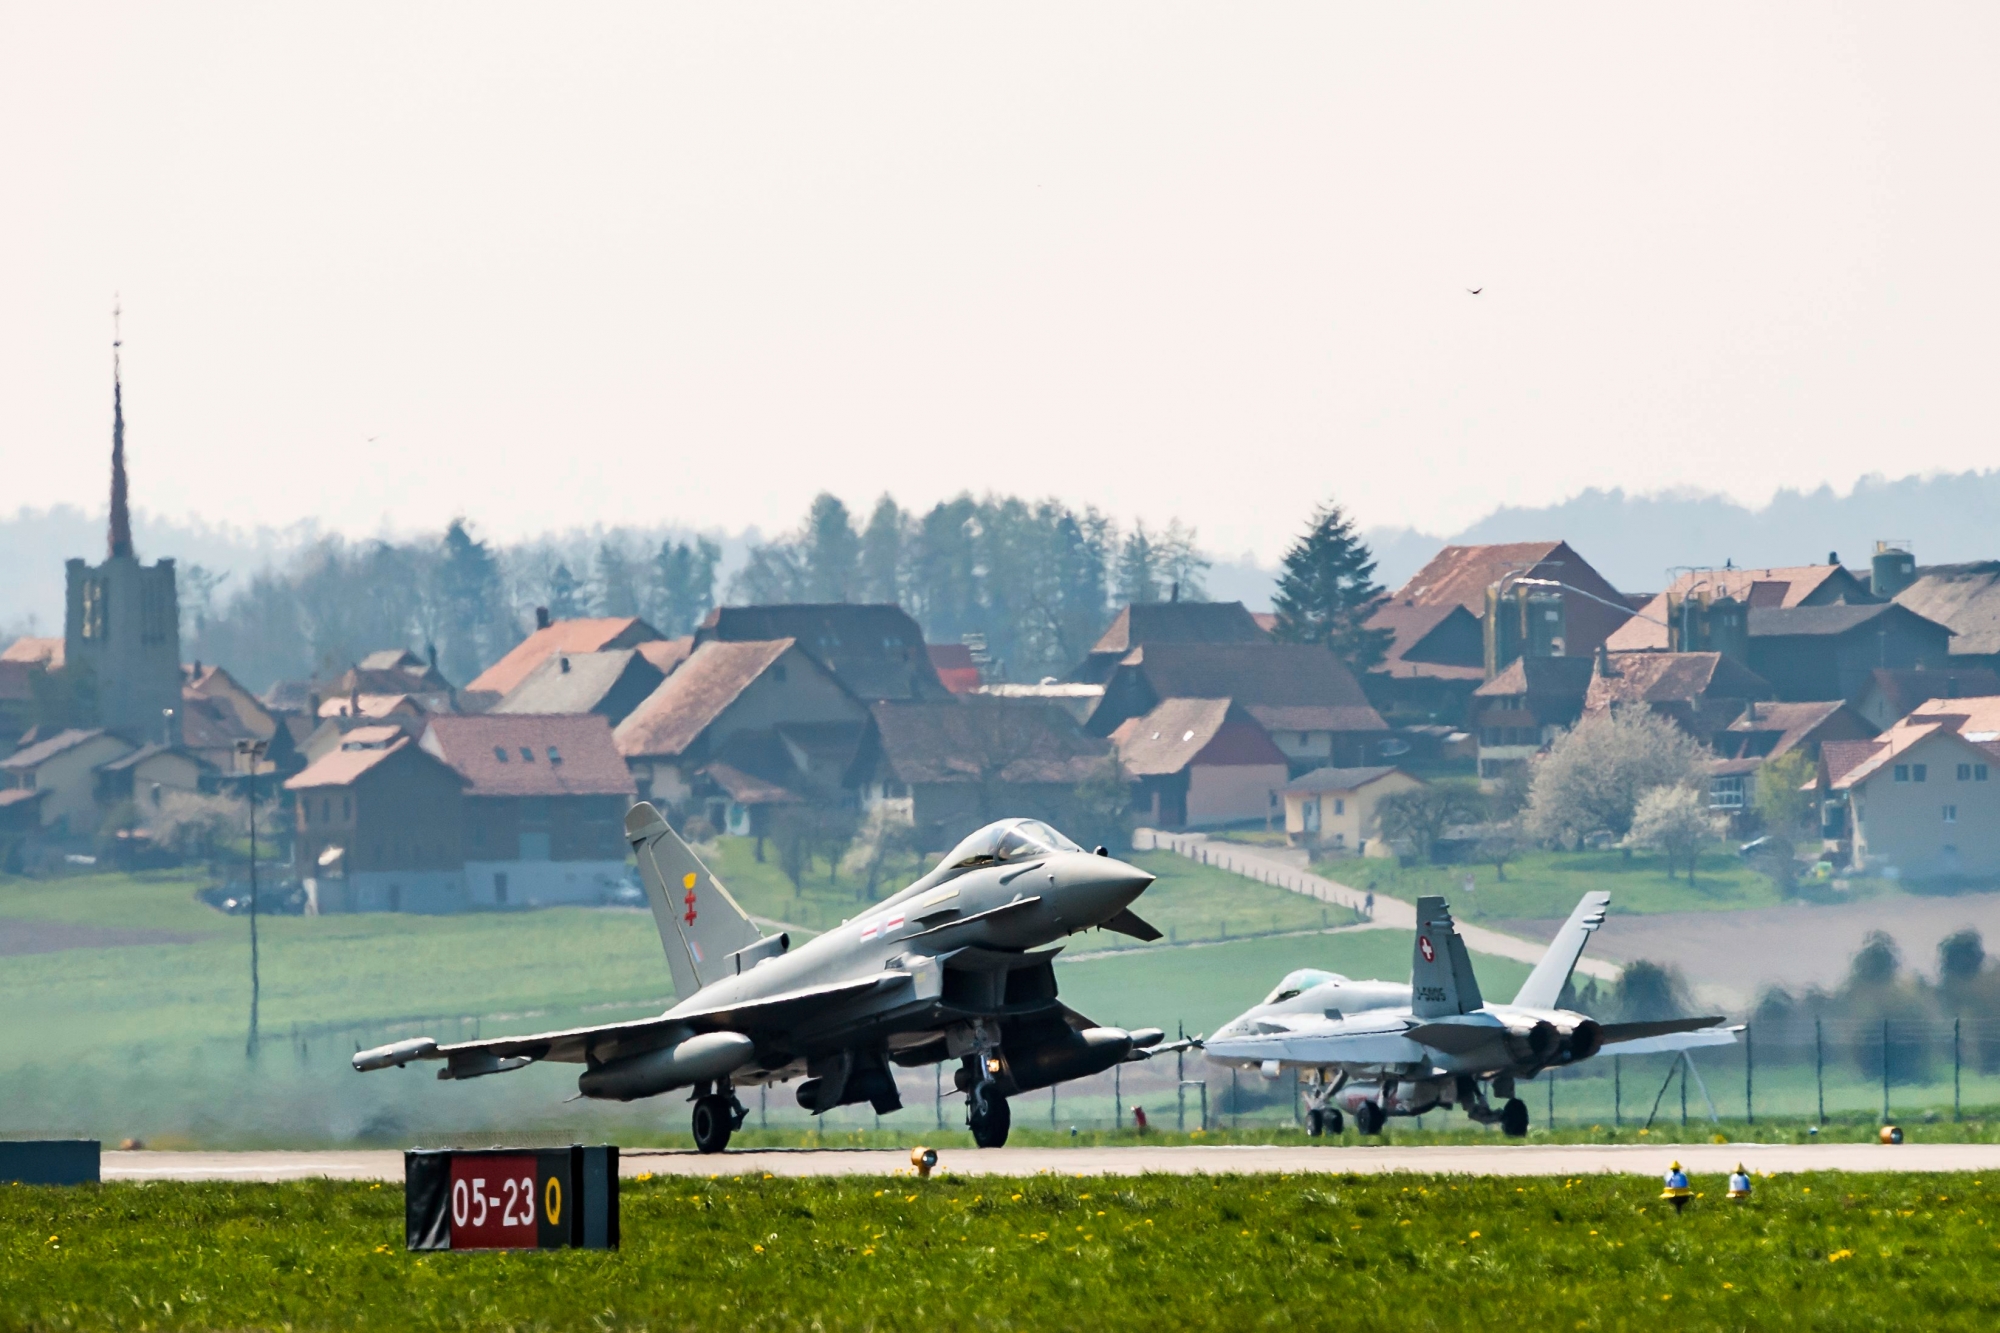 A Airbus Eurofighter jet takes off next to a Swiss Air Force F/A-18 Hornet during a evaluating day at the Swiss Army airbase, in Payerne, Switzerland, Friday, April 12, 2019. (KEYSTONE/Jean-Christophe Bott) SWITZERLAND EUROFIGHTER JET